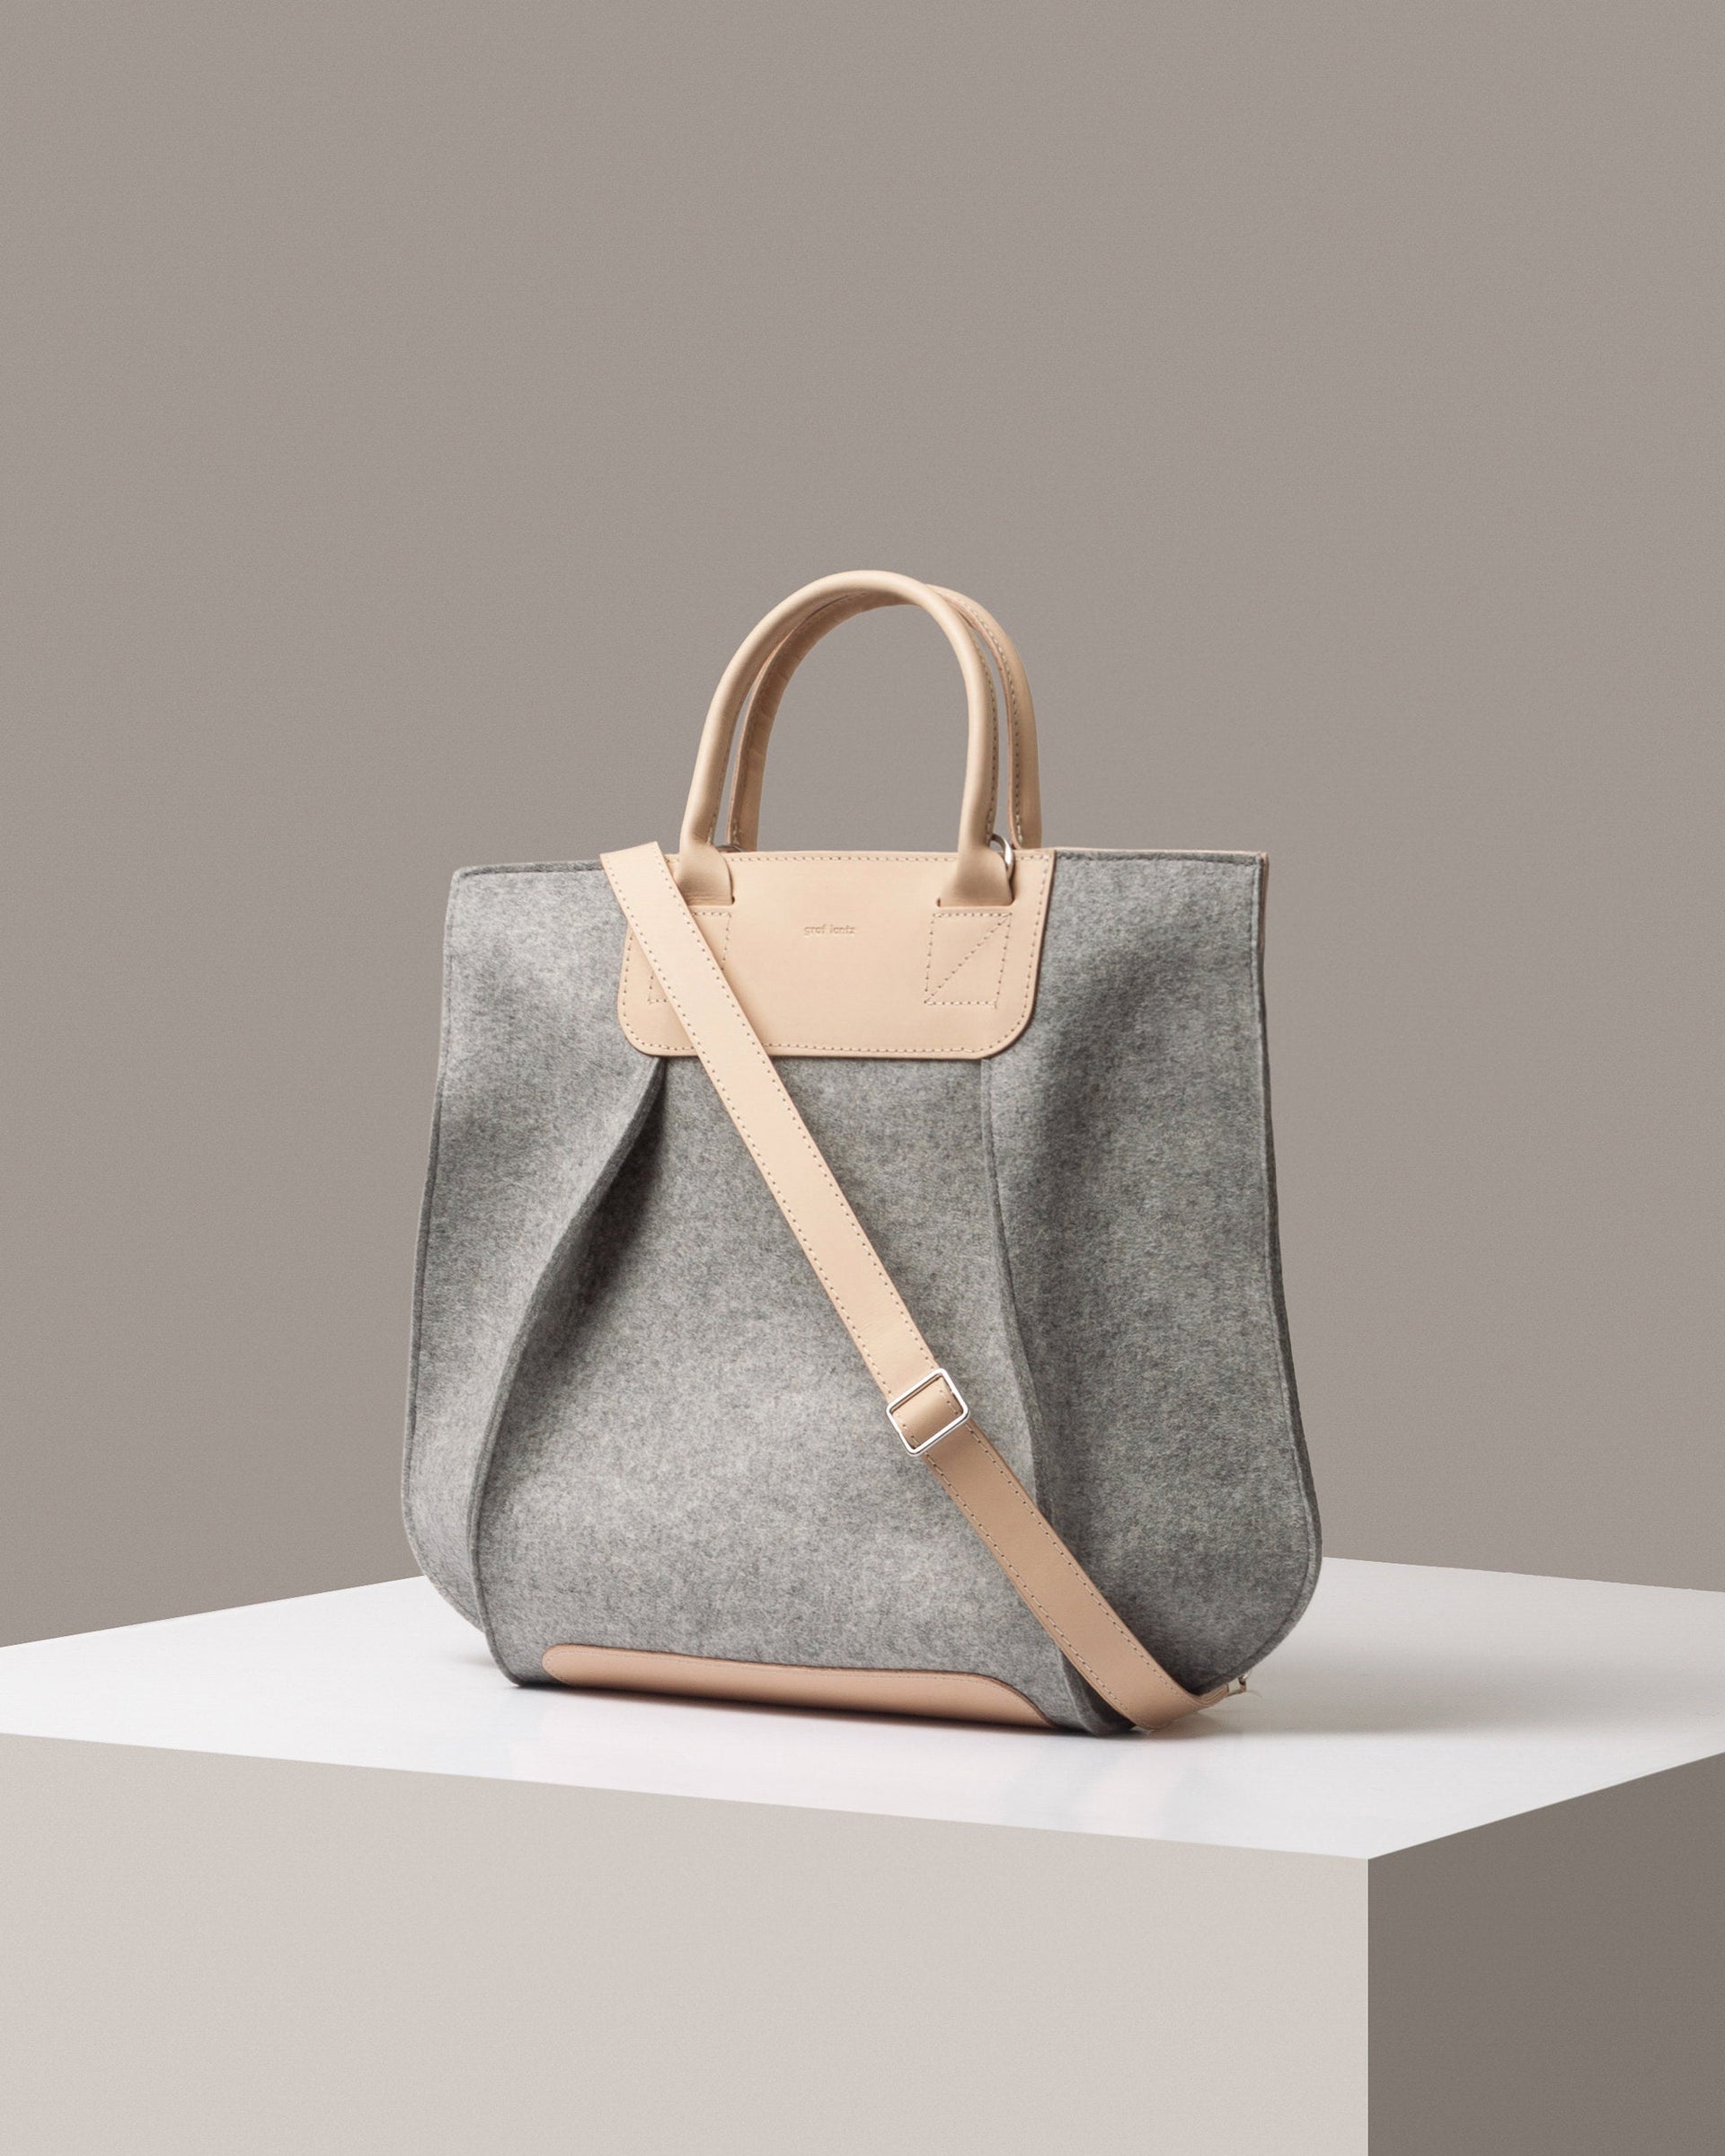 A stylish Frankie Merino Wool Felt Tote and crossbody bag in gray with a beige leather shoulder strap, displayed in a three-quarter view on a white base